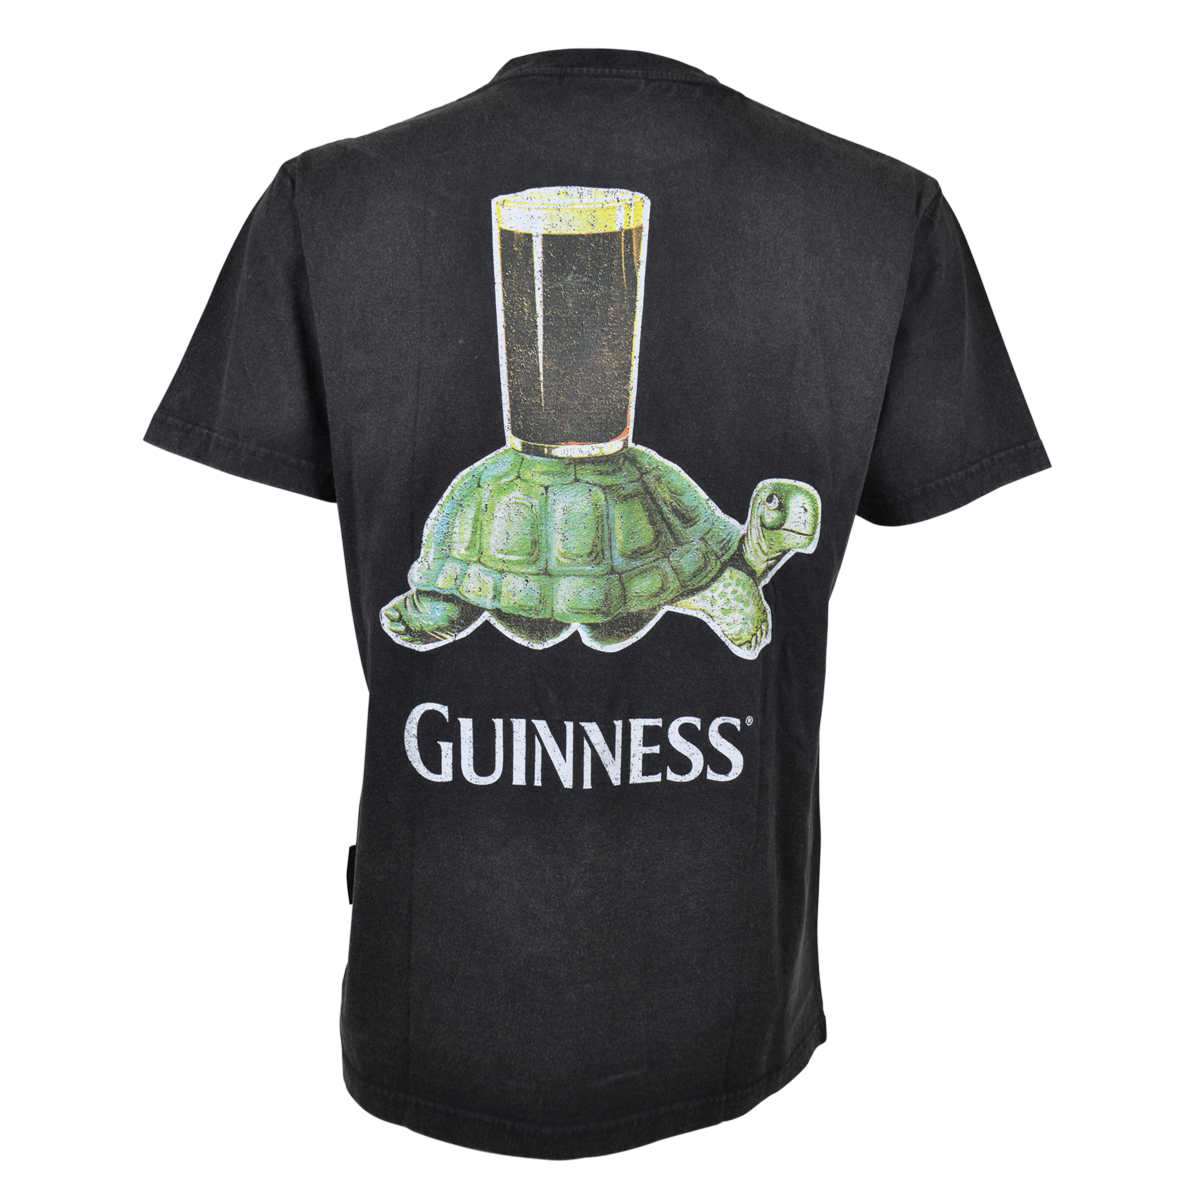 This Guinness Premium Vintage Turtle Back Graphic Tee features a distressed effect. Made from comfortable cotton material.